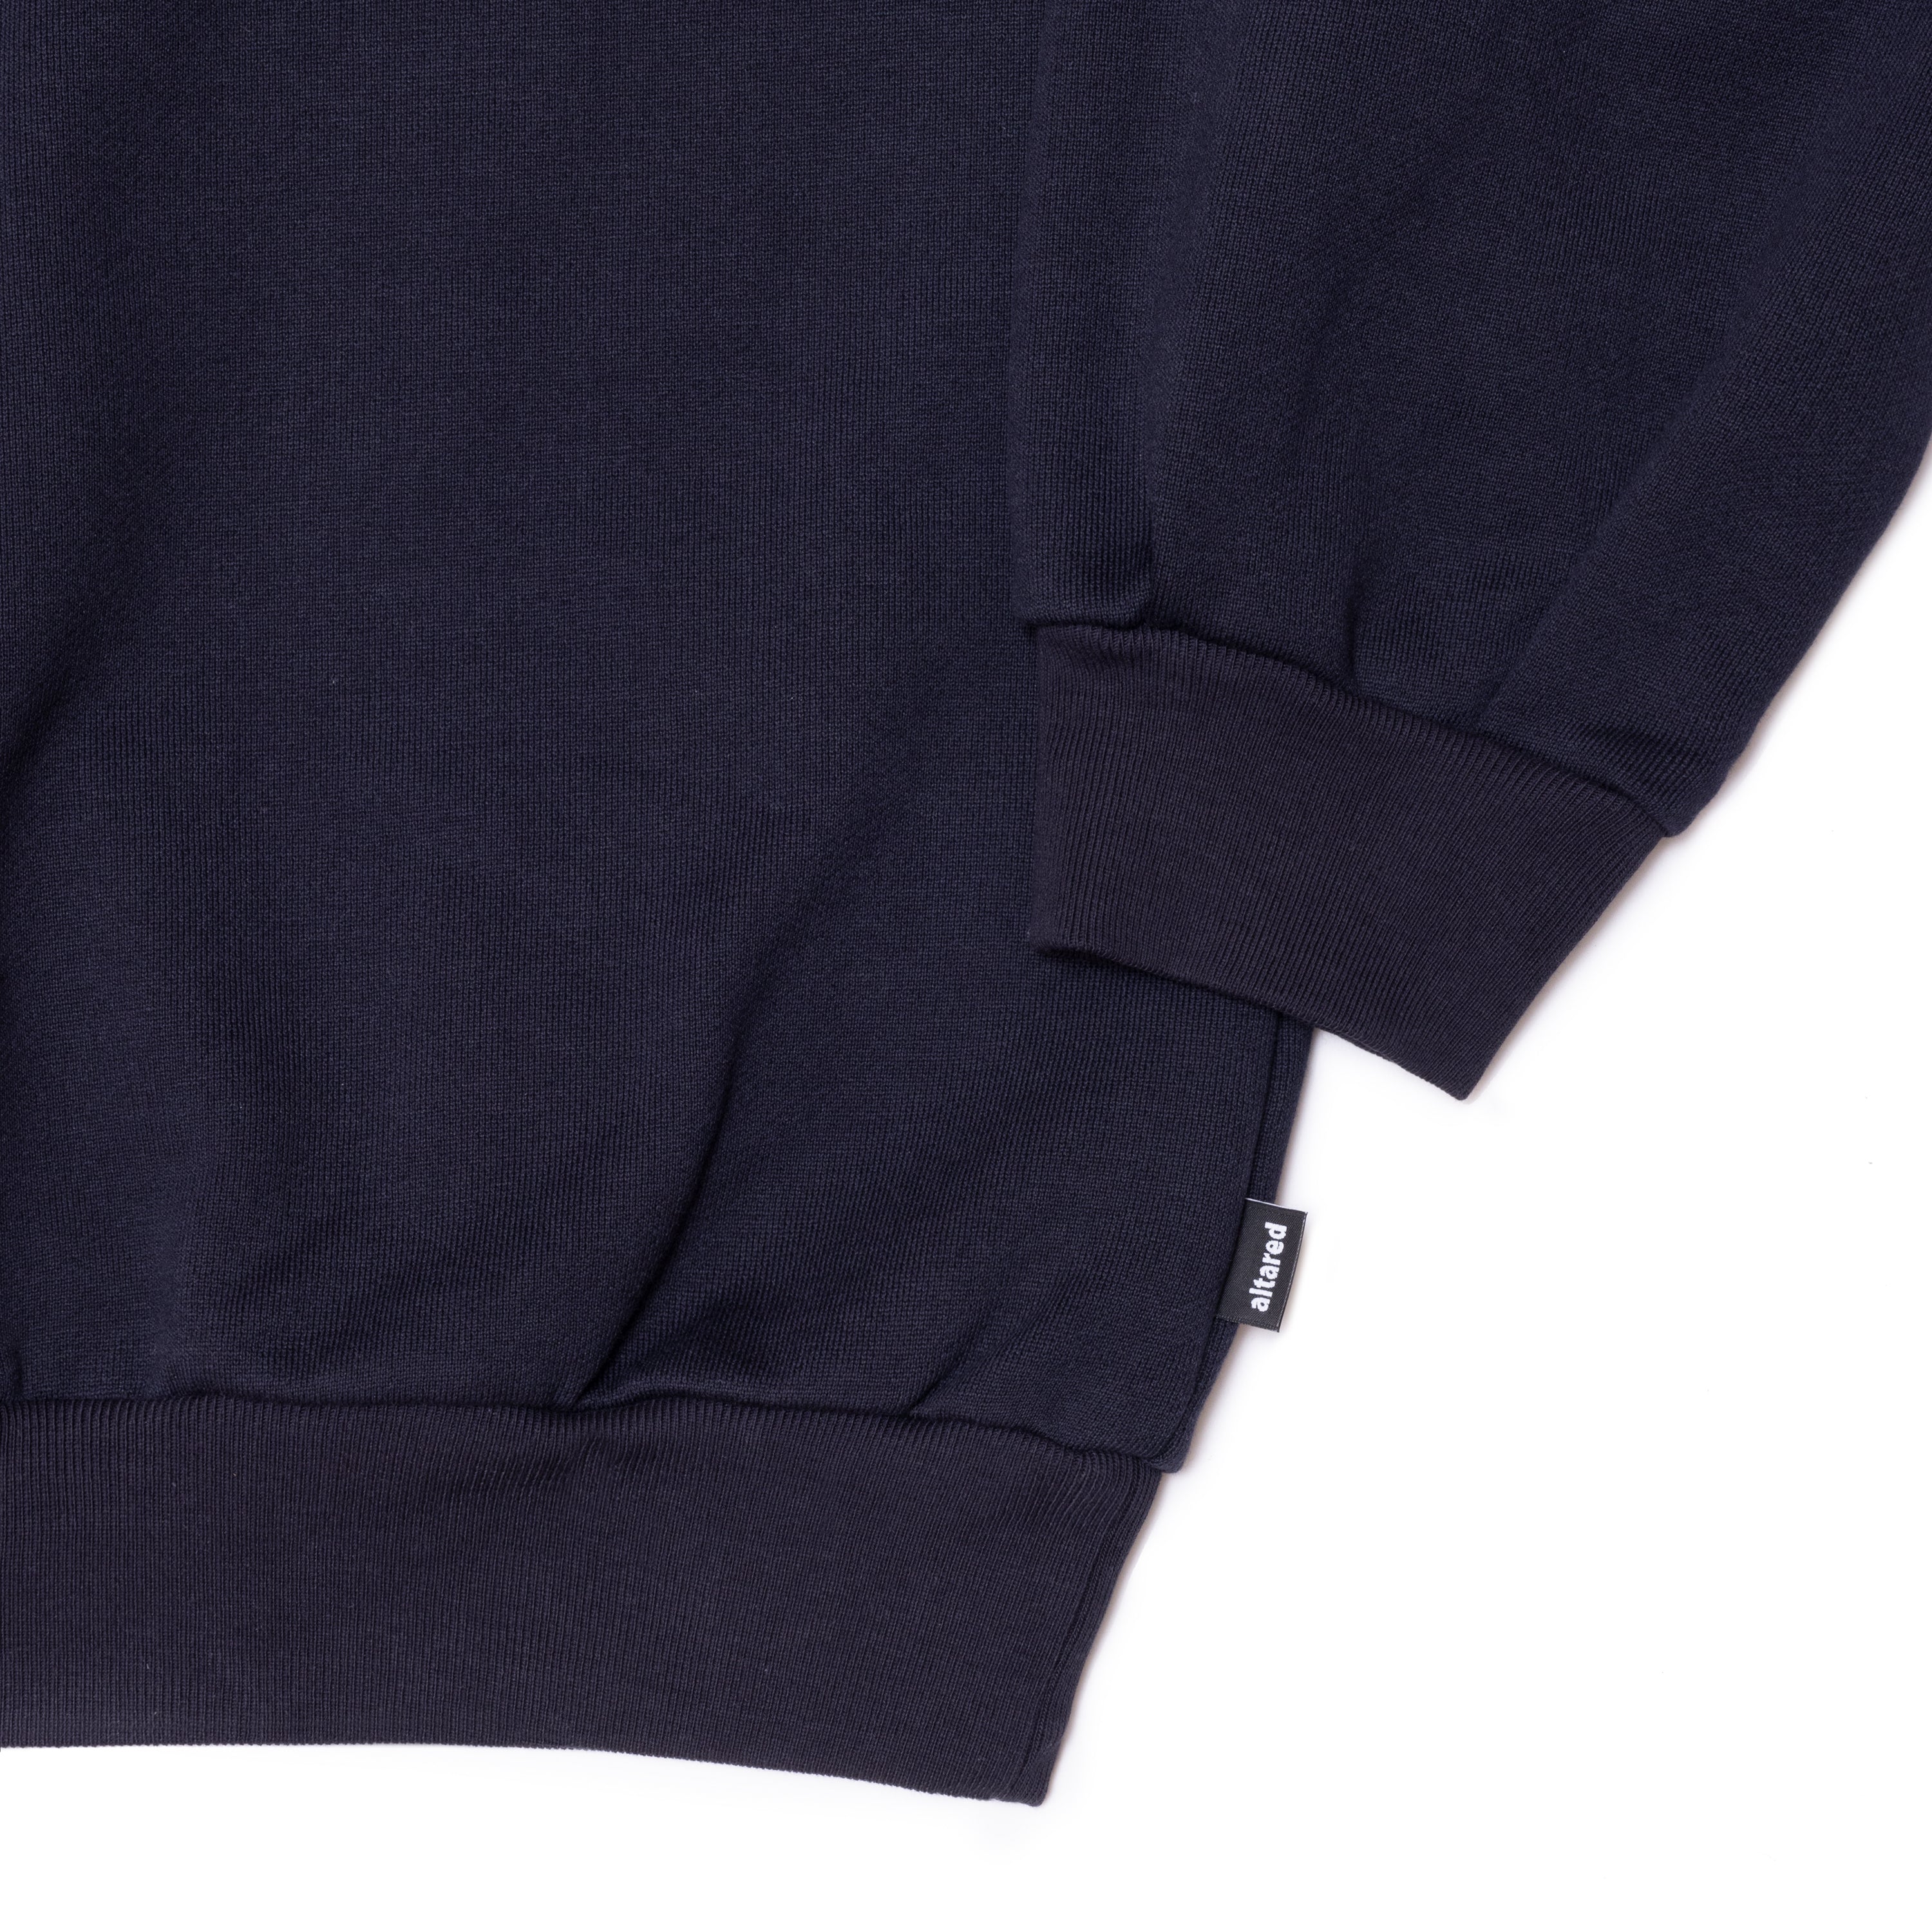 altared/Logo 3D Embroidery Hooded Sweat Shirt[NAVY]